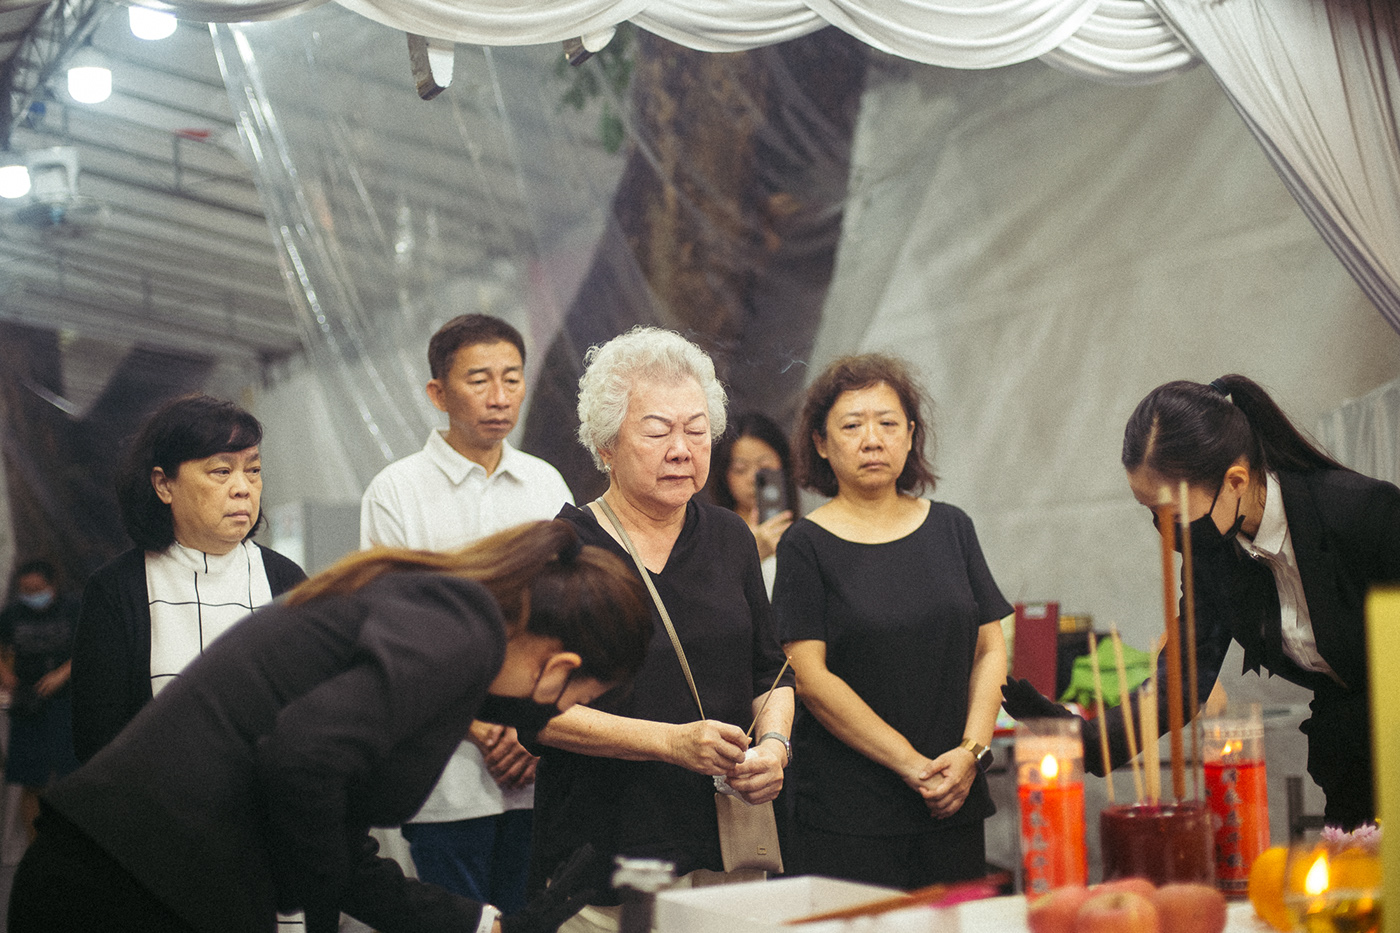 funeral death obituary singapore Documentary Photography